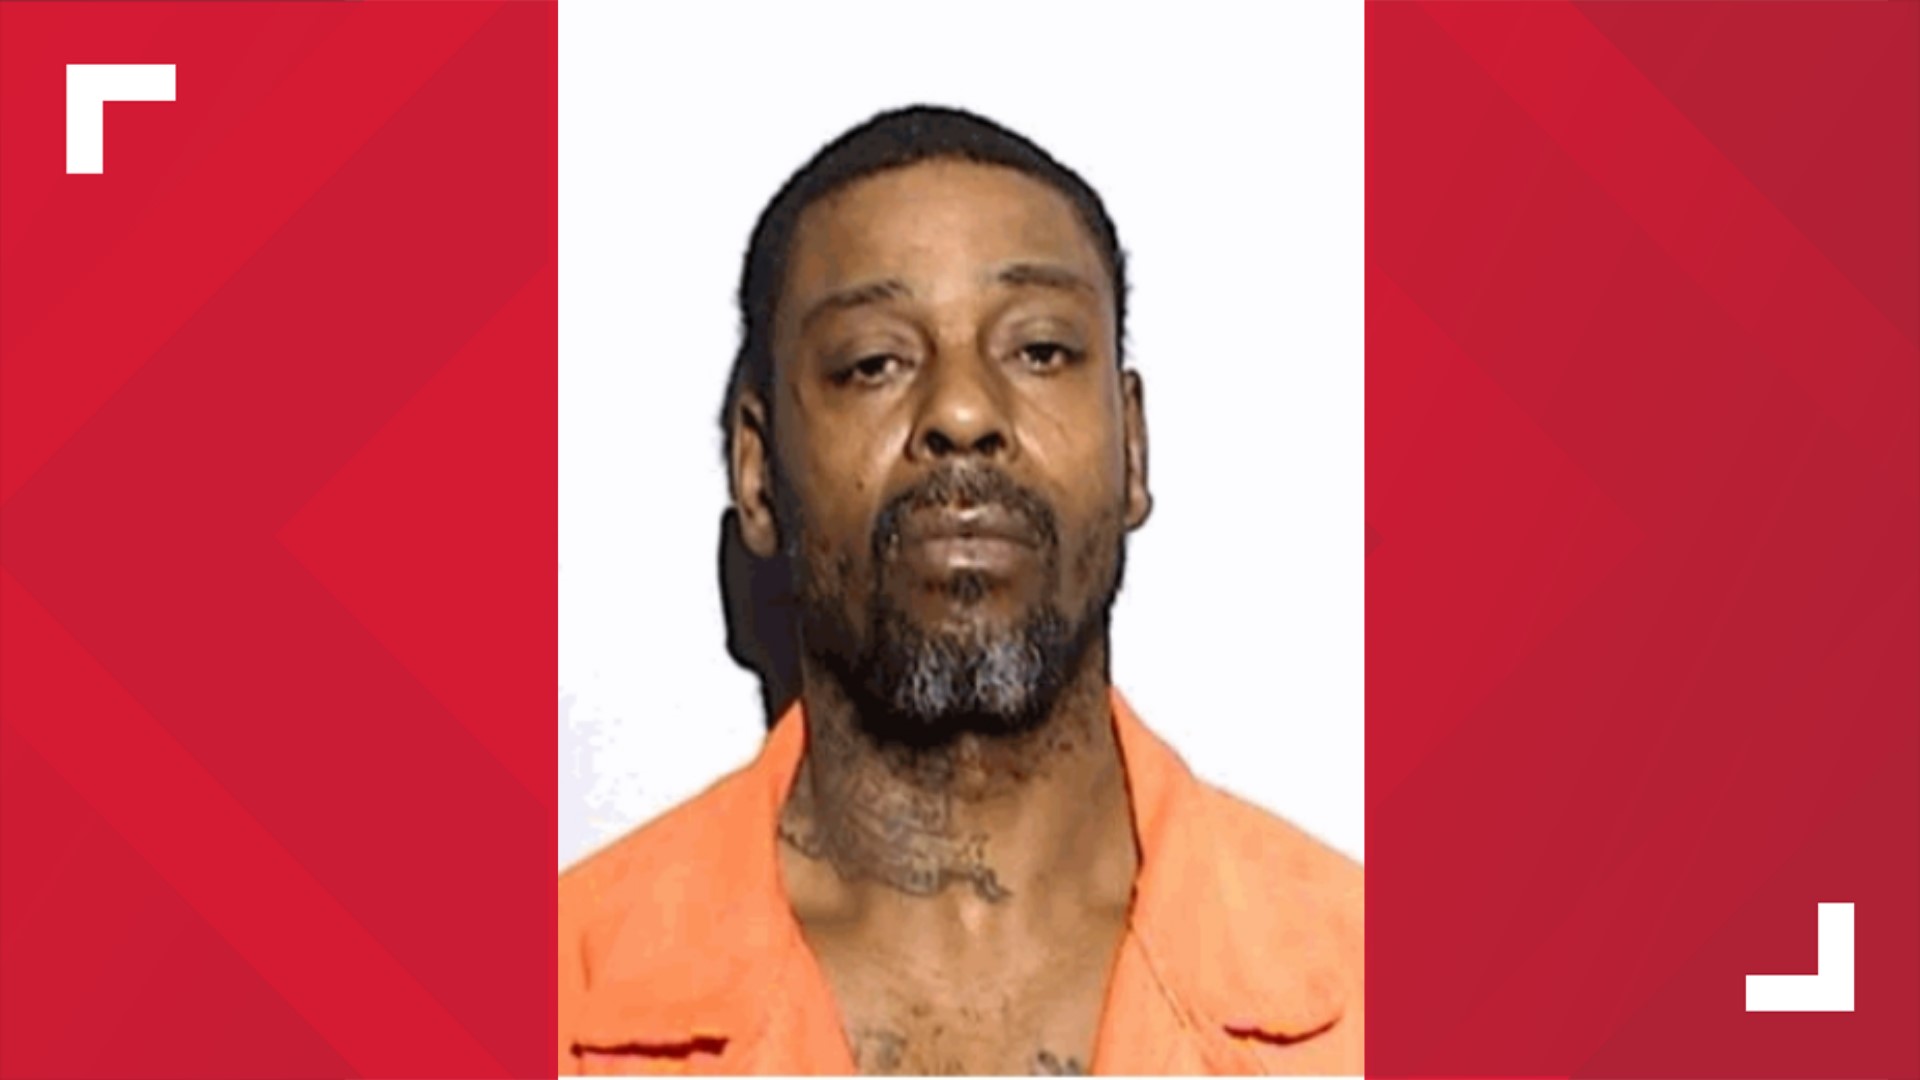 Anthony Mitchell, 50, is charged with murder in the death of Michelle Borer, 60, who was found dead in her central Toledo home in December.